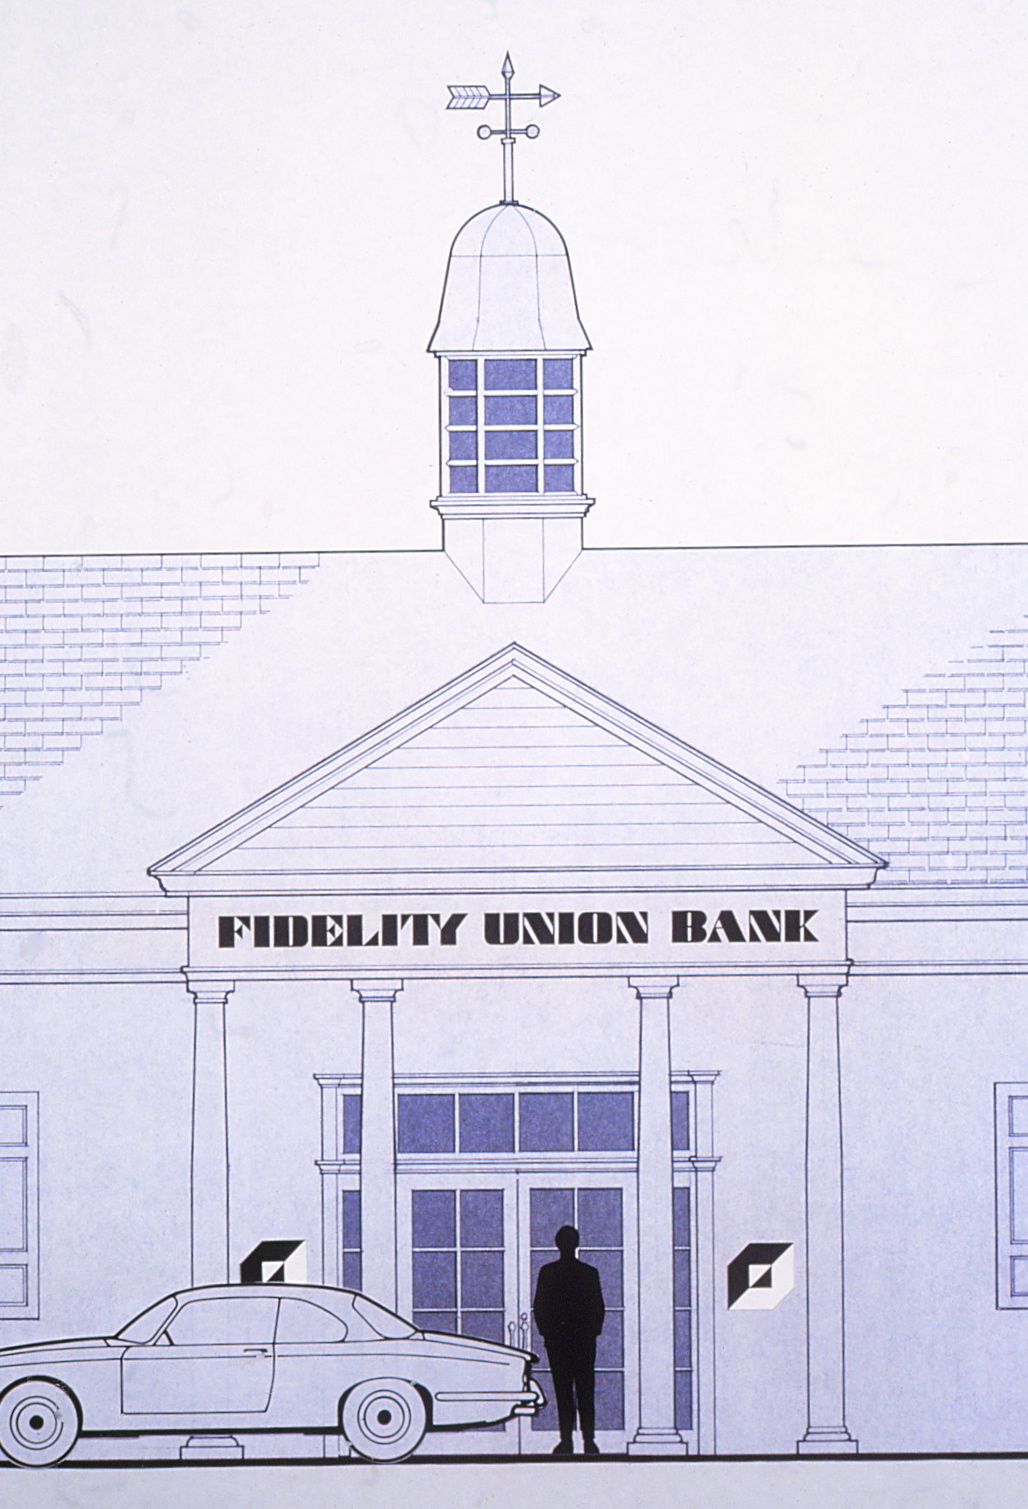 Elevation drawing featuring the logo and typface as it would appear on the frant of a typical bank building, 
        with a car and a person standing in front of it.